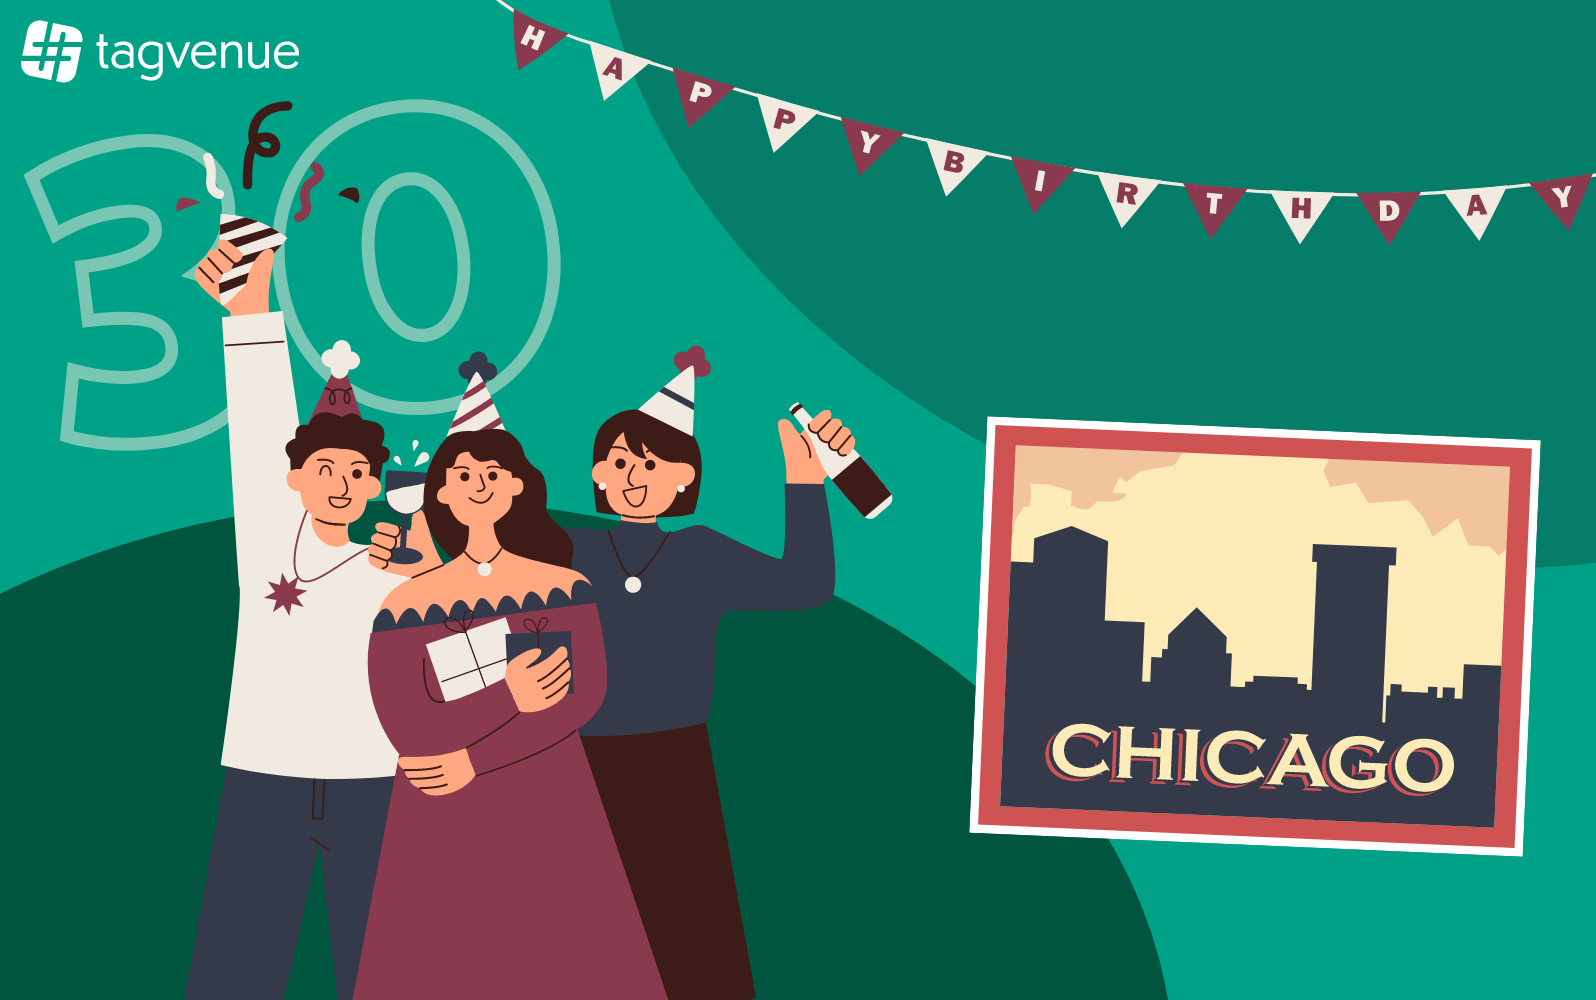 Top 14 Ideas to Experience the Best of Chicago on Your 30th Birthday